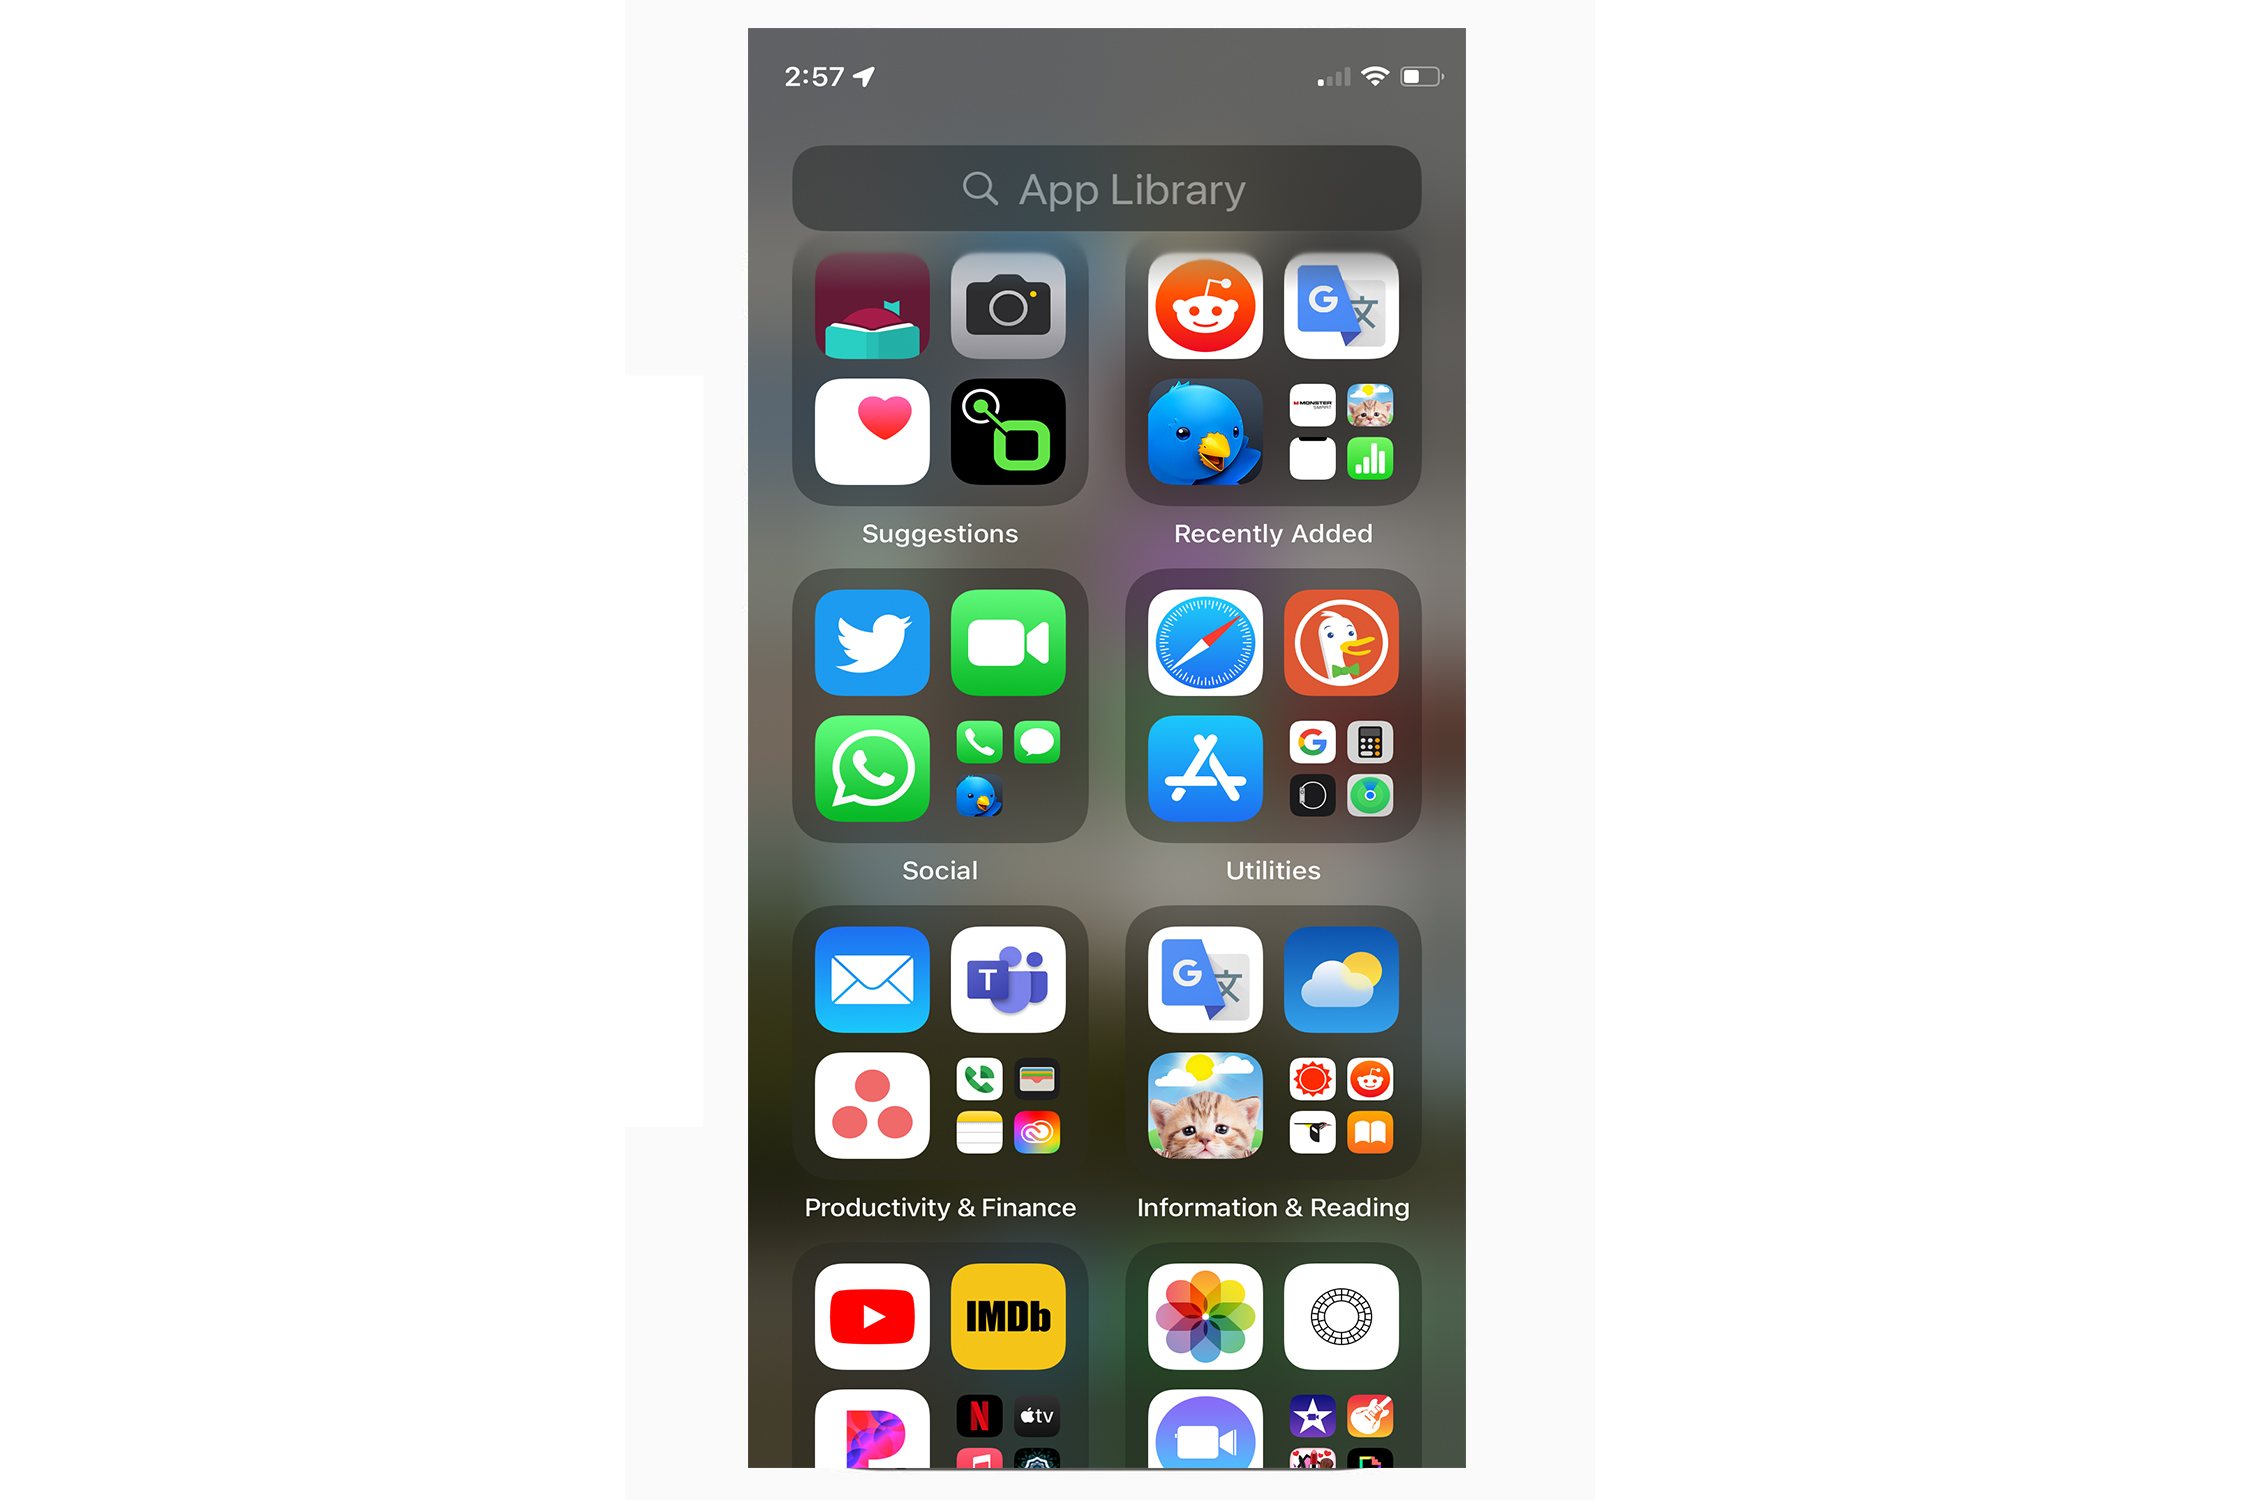  How to make a folder on an iPhone to organize your favorite apps